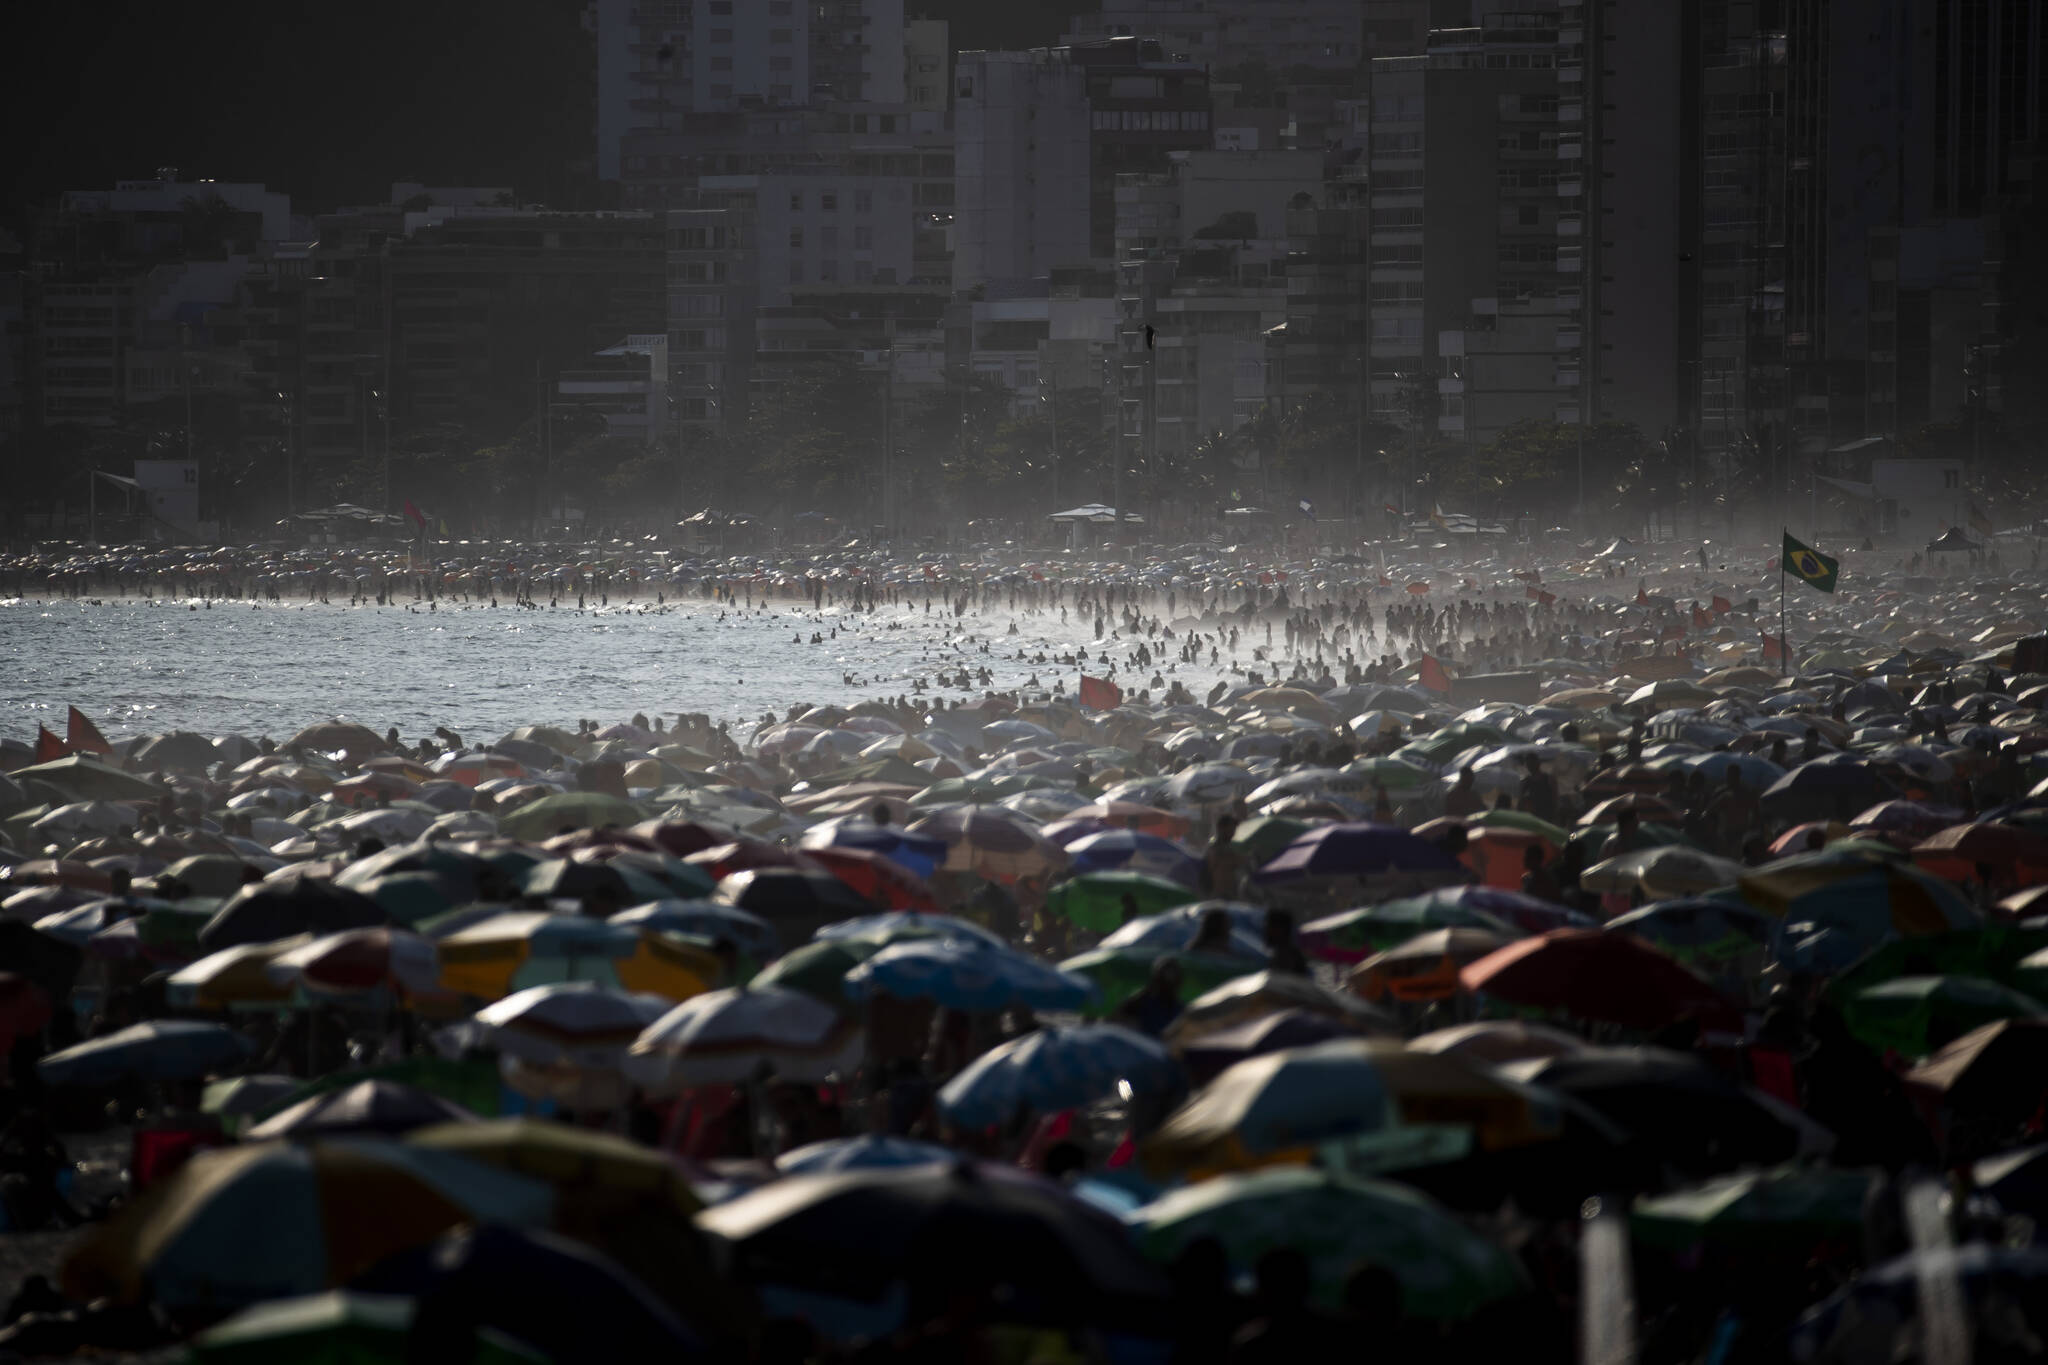 People enjoy the Ipanema beach, in Rio de Janeiro, Brazil, Sunday, Nov.13, 2022. The world’s population is projected to hit an estimated 8 billion people on Tuesday, Nov. 15, according to a United Nations projection. (AP Photo / Bruna Prado)